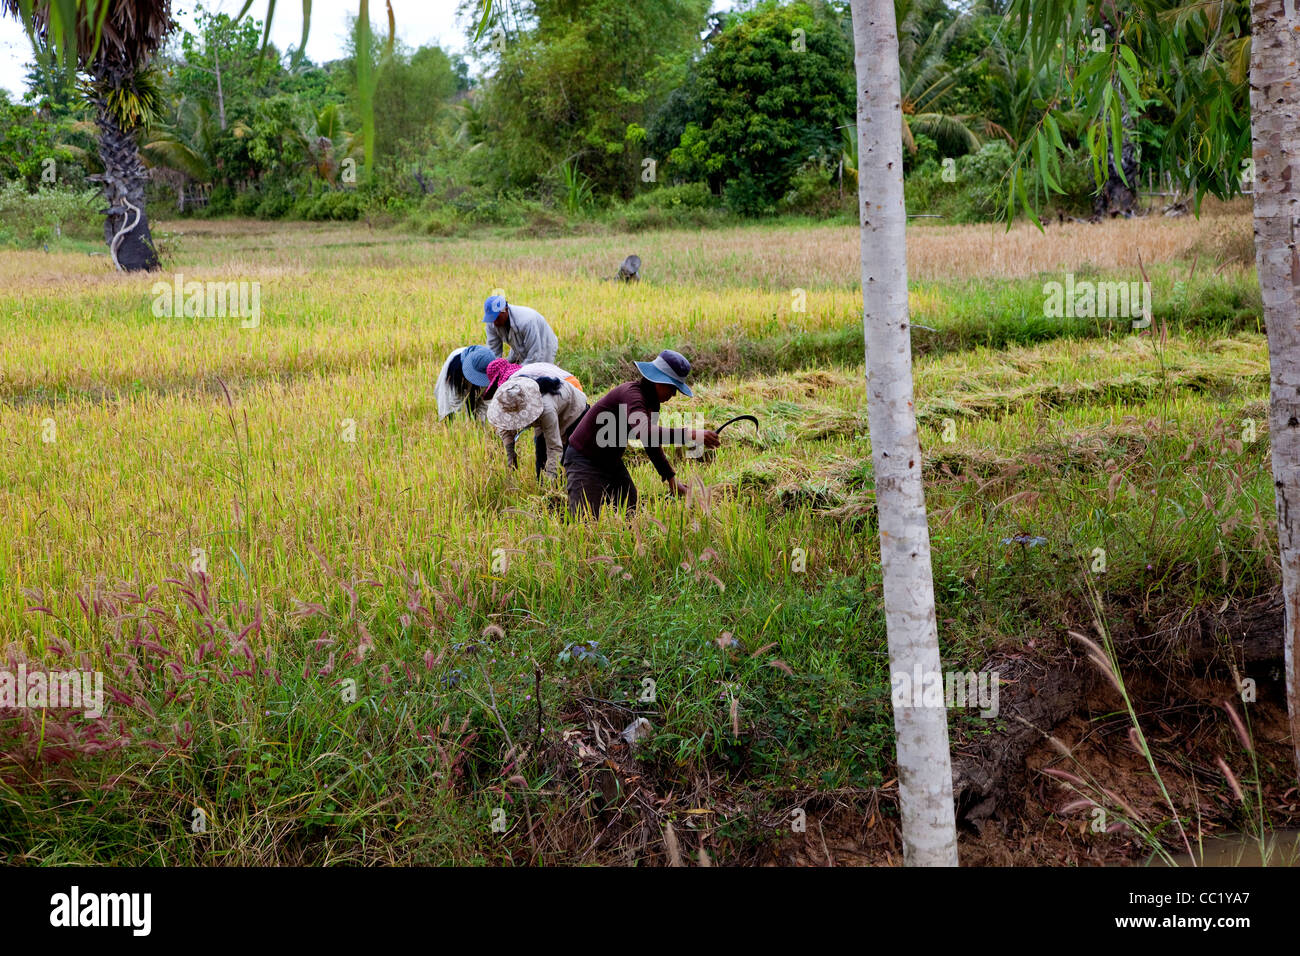 Group of people at work as farmers and peasants in rice field, countryside northwest of Phnom Penh, Cambodia, Asia Stock Photo